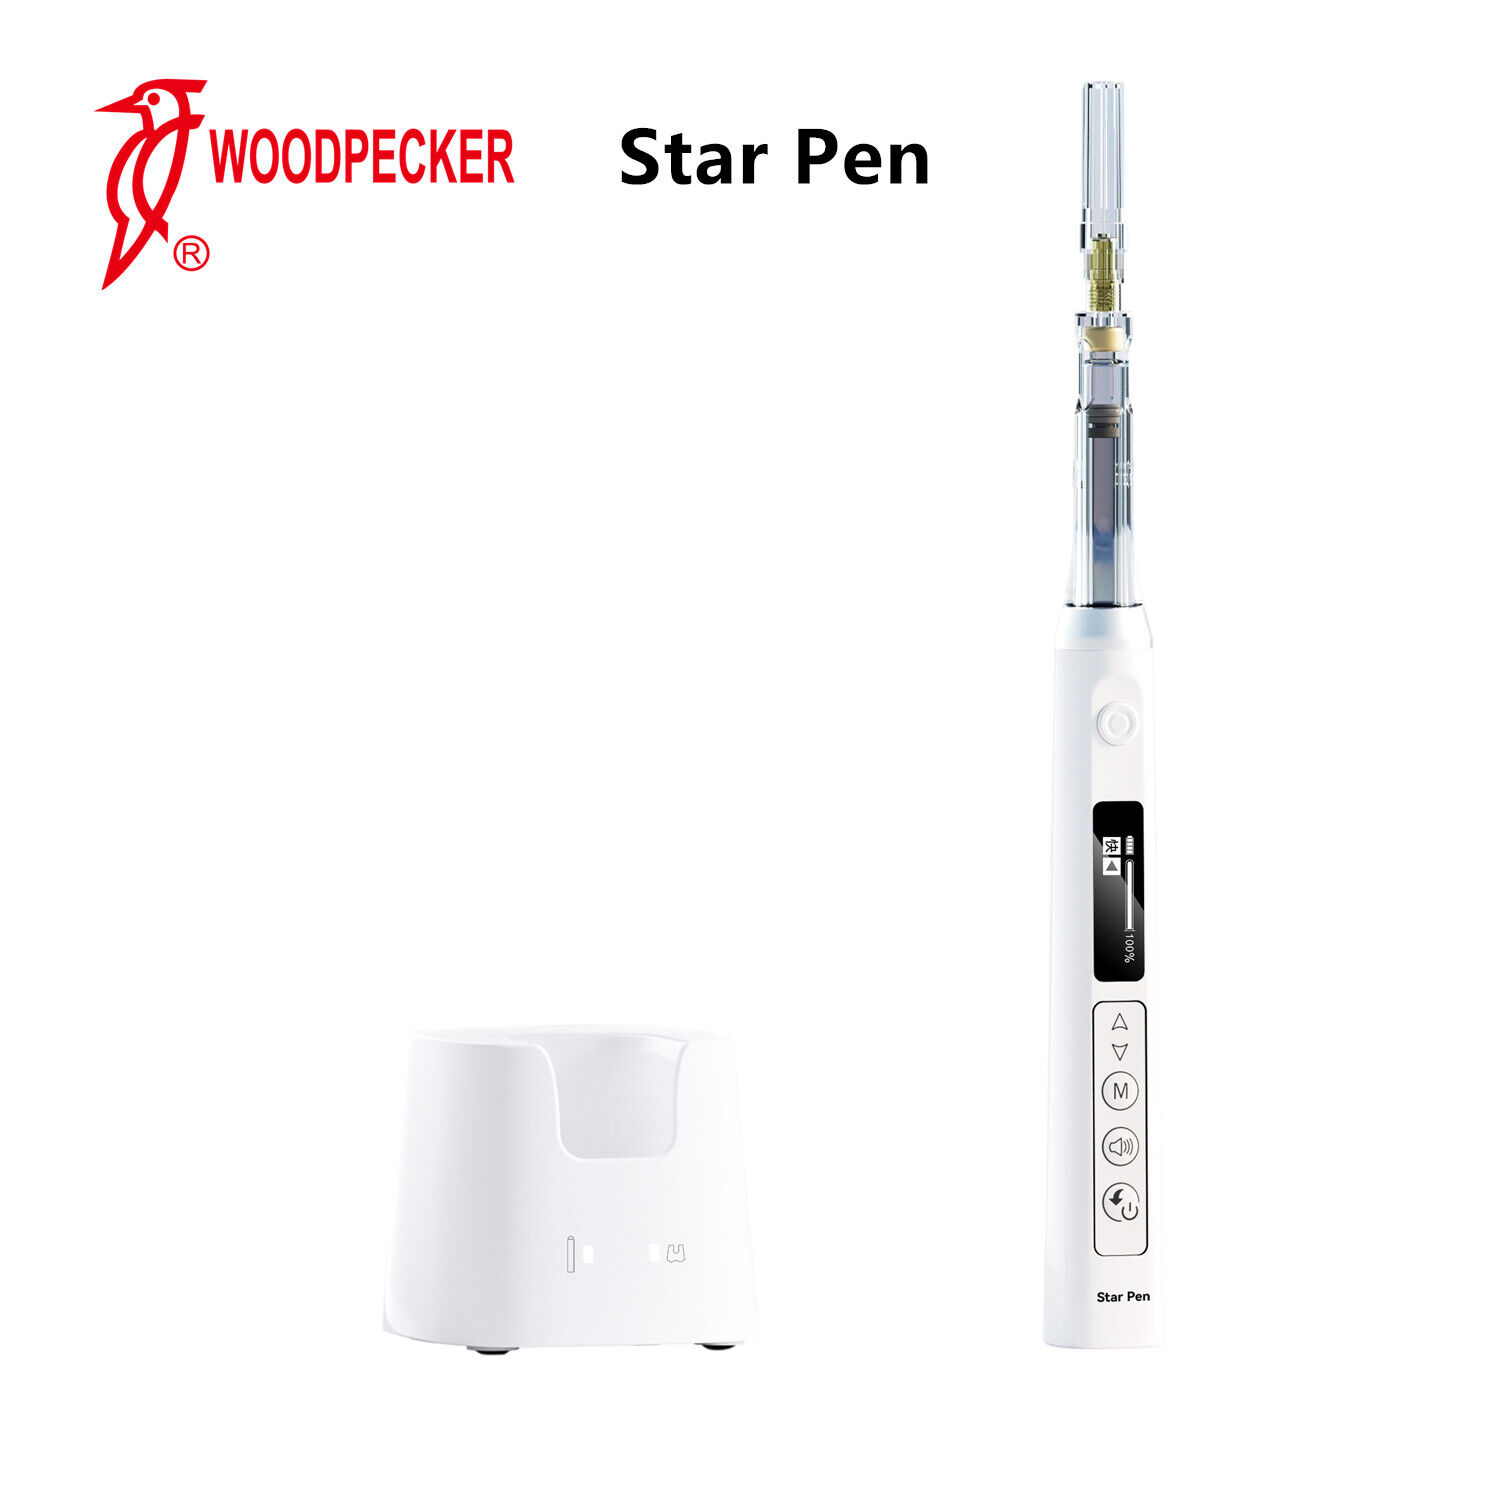 Woodpecker Star Pen Painless Electronic Anesthesia Delivery Syringe System